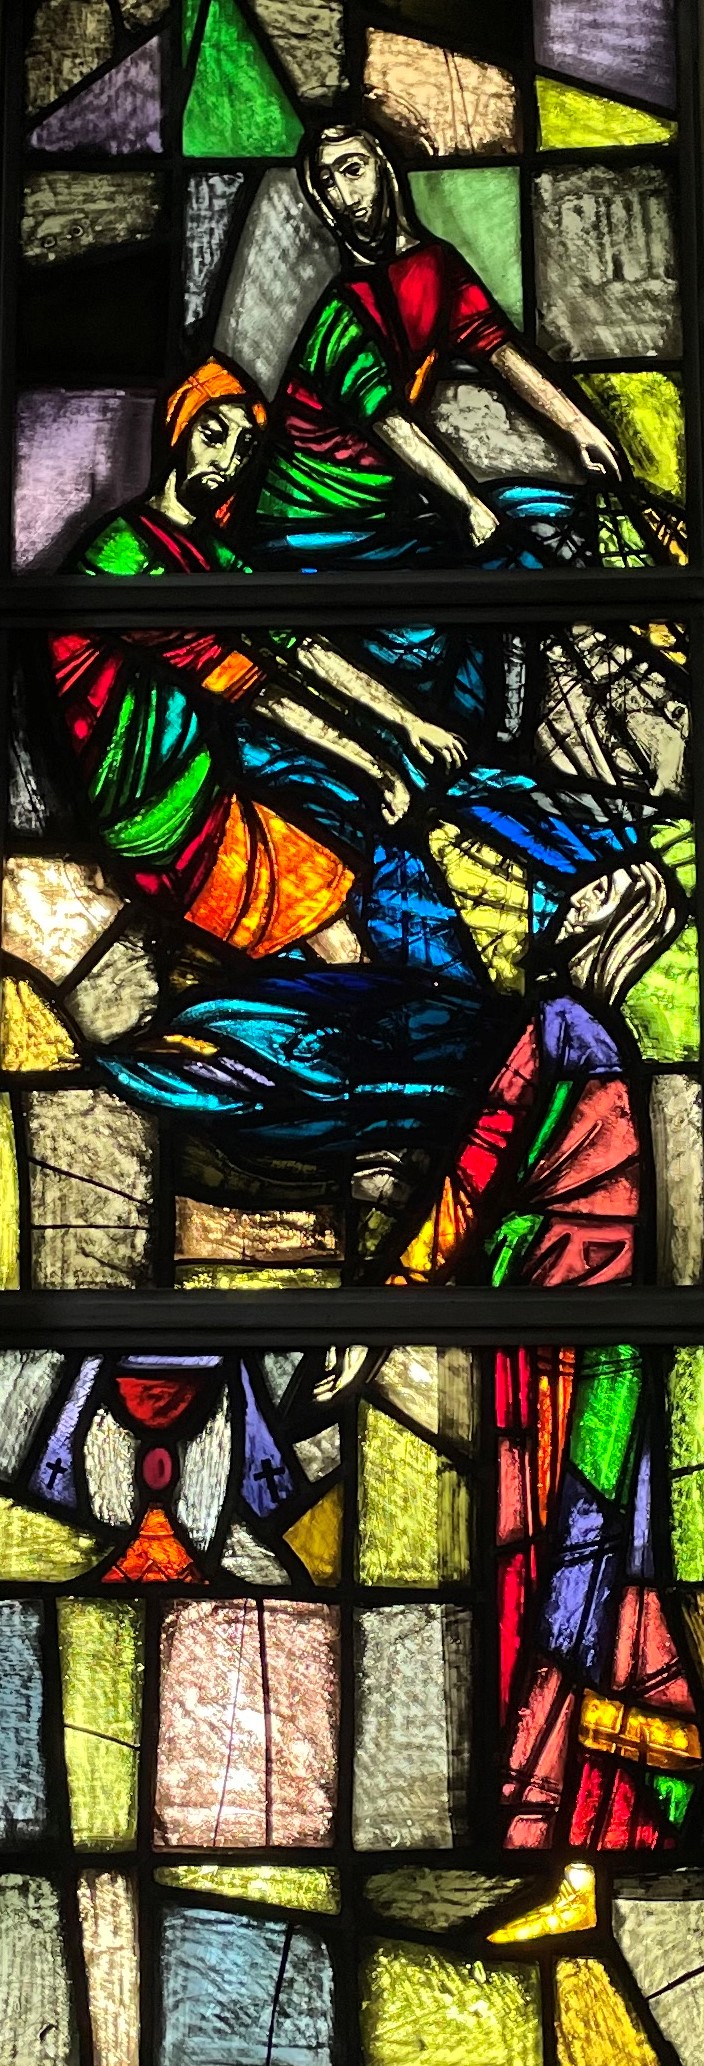 Picture of stained glass window showing the apostles hauling their nets full of fish